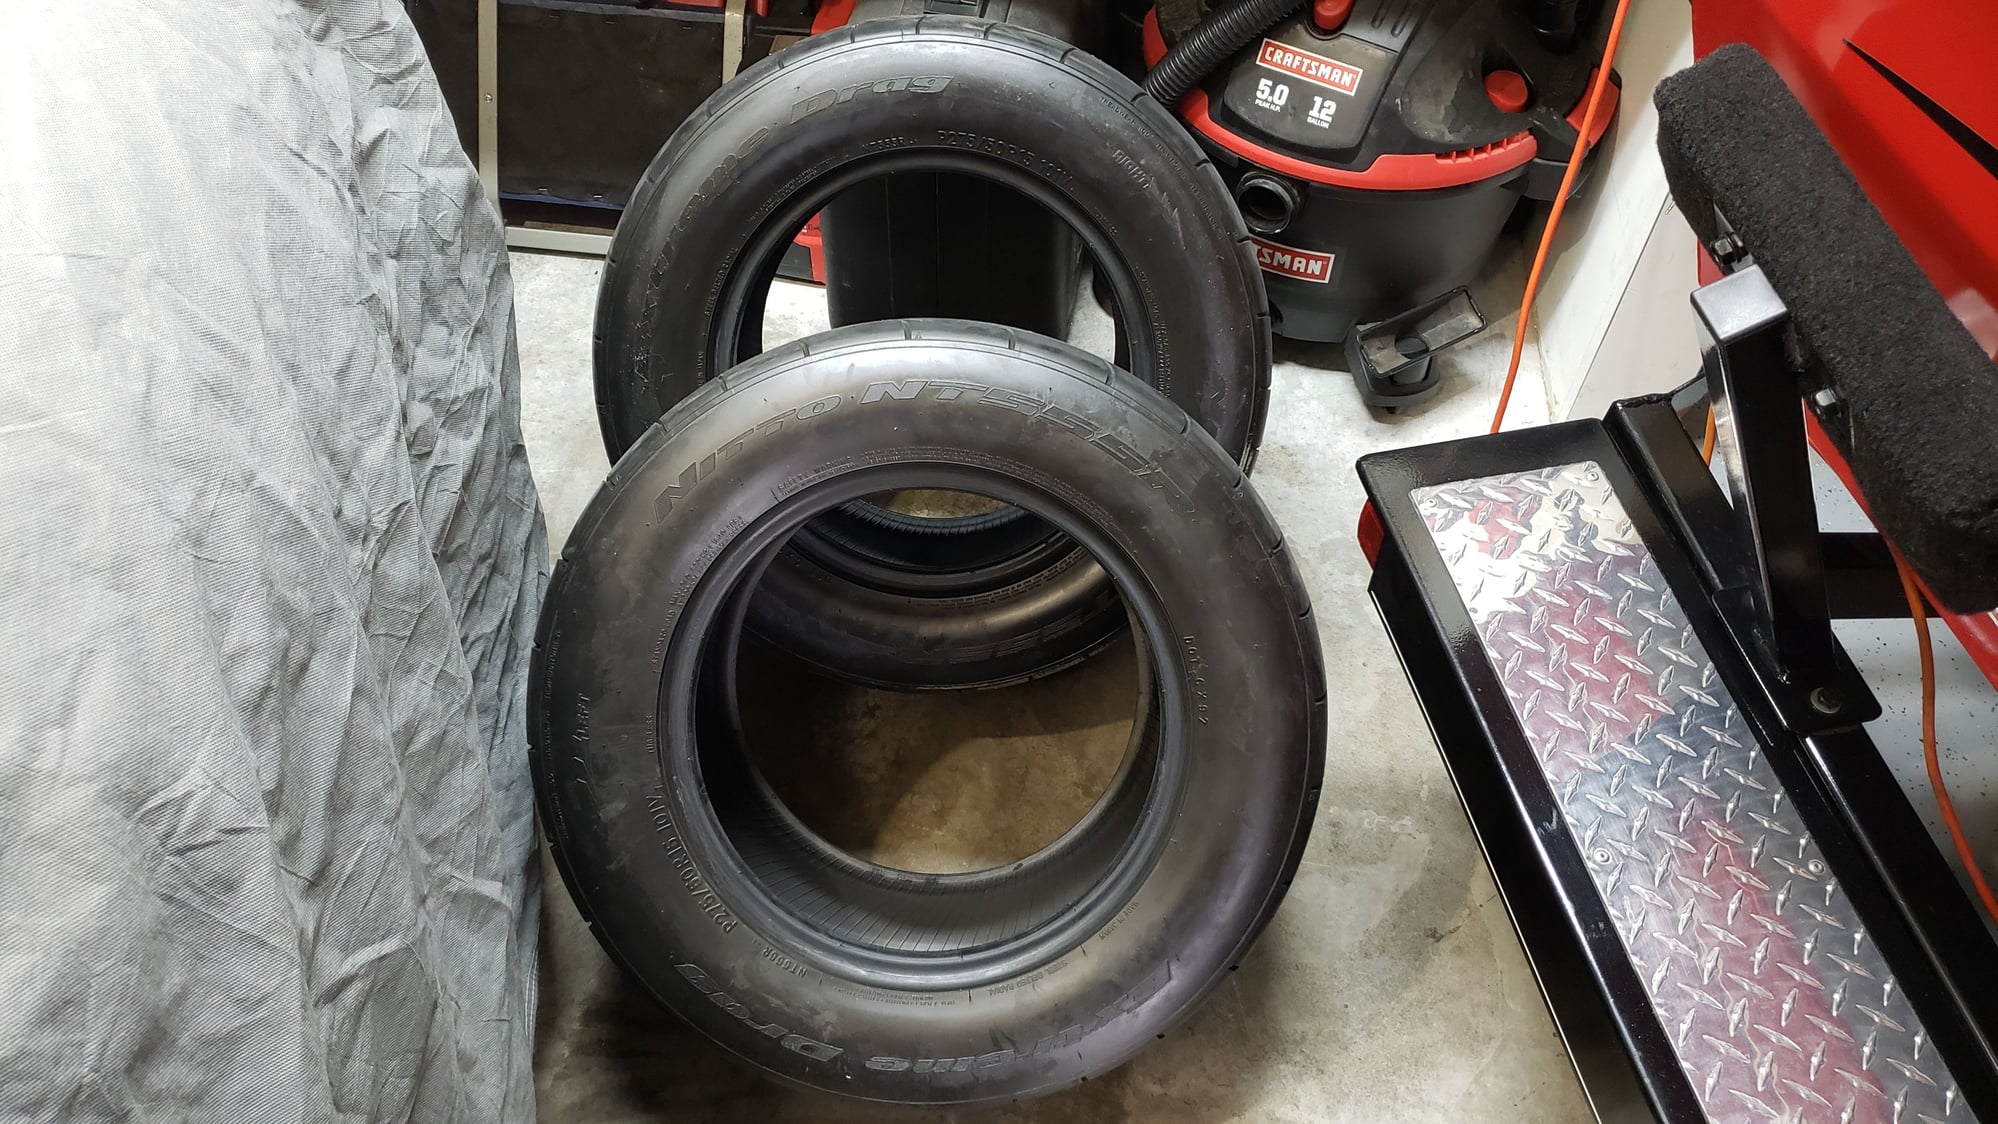  - Barely used Nitto NT555R 275/50R15 - Fort Wayne, IN 46835, United States